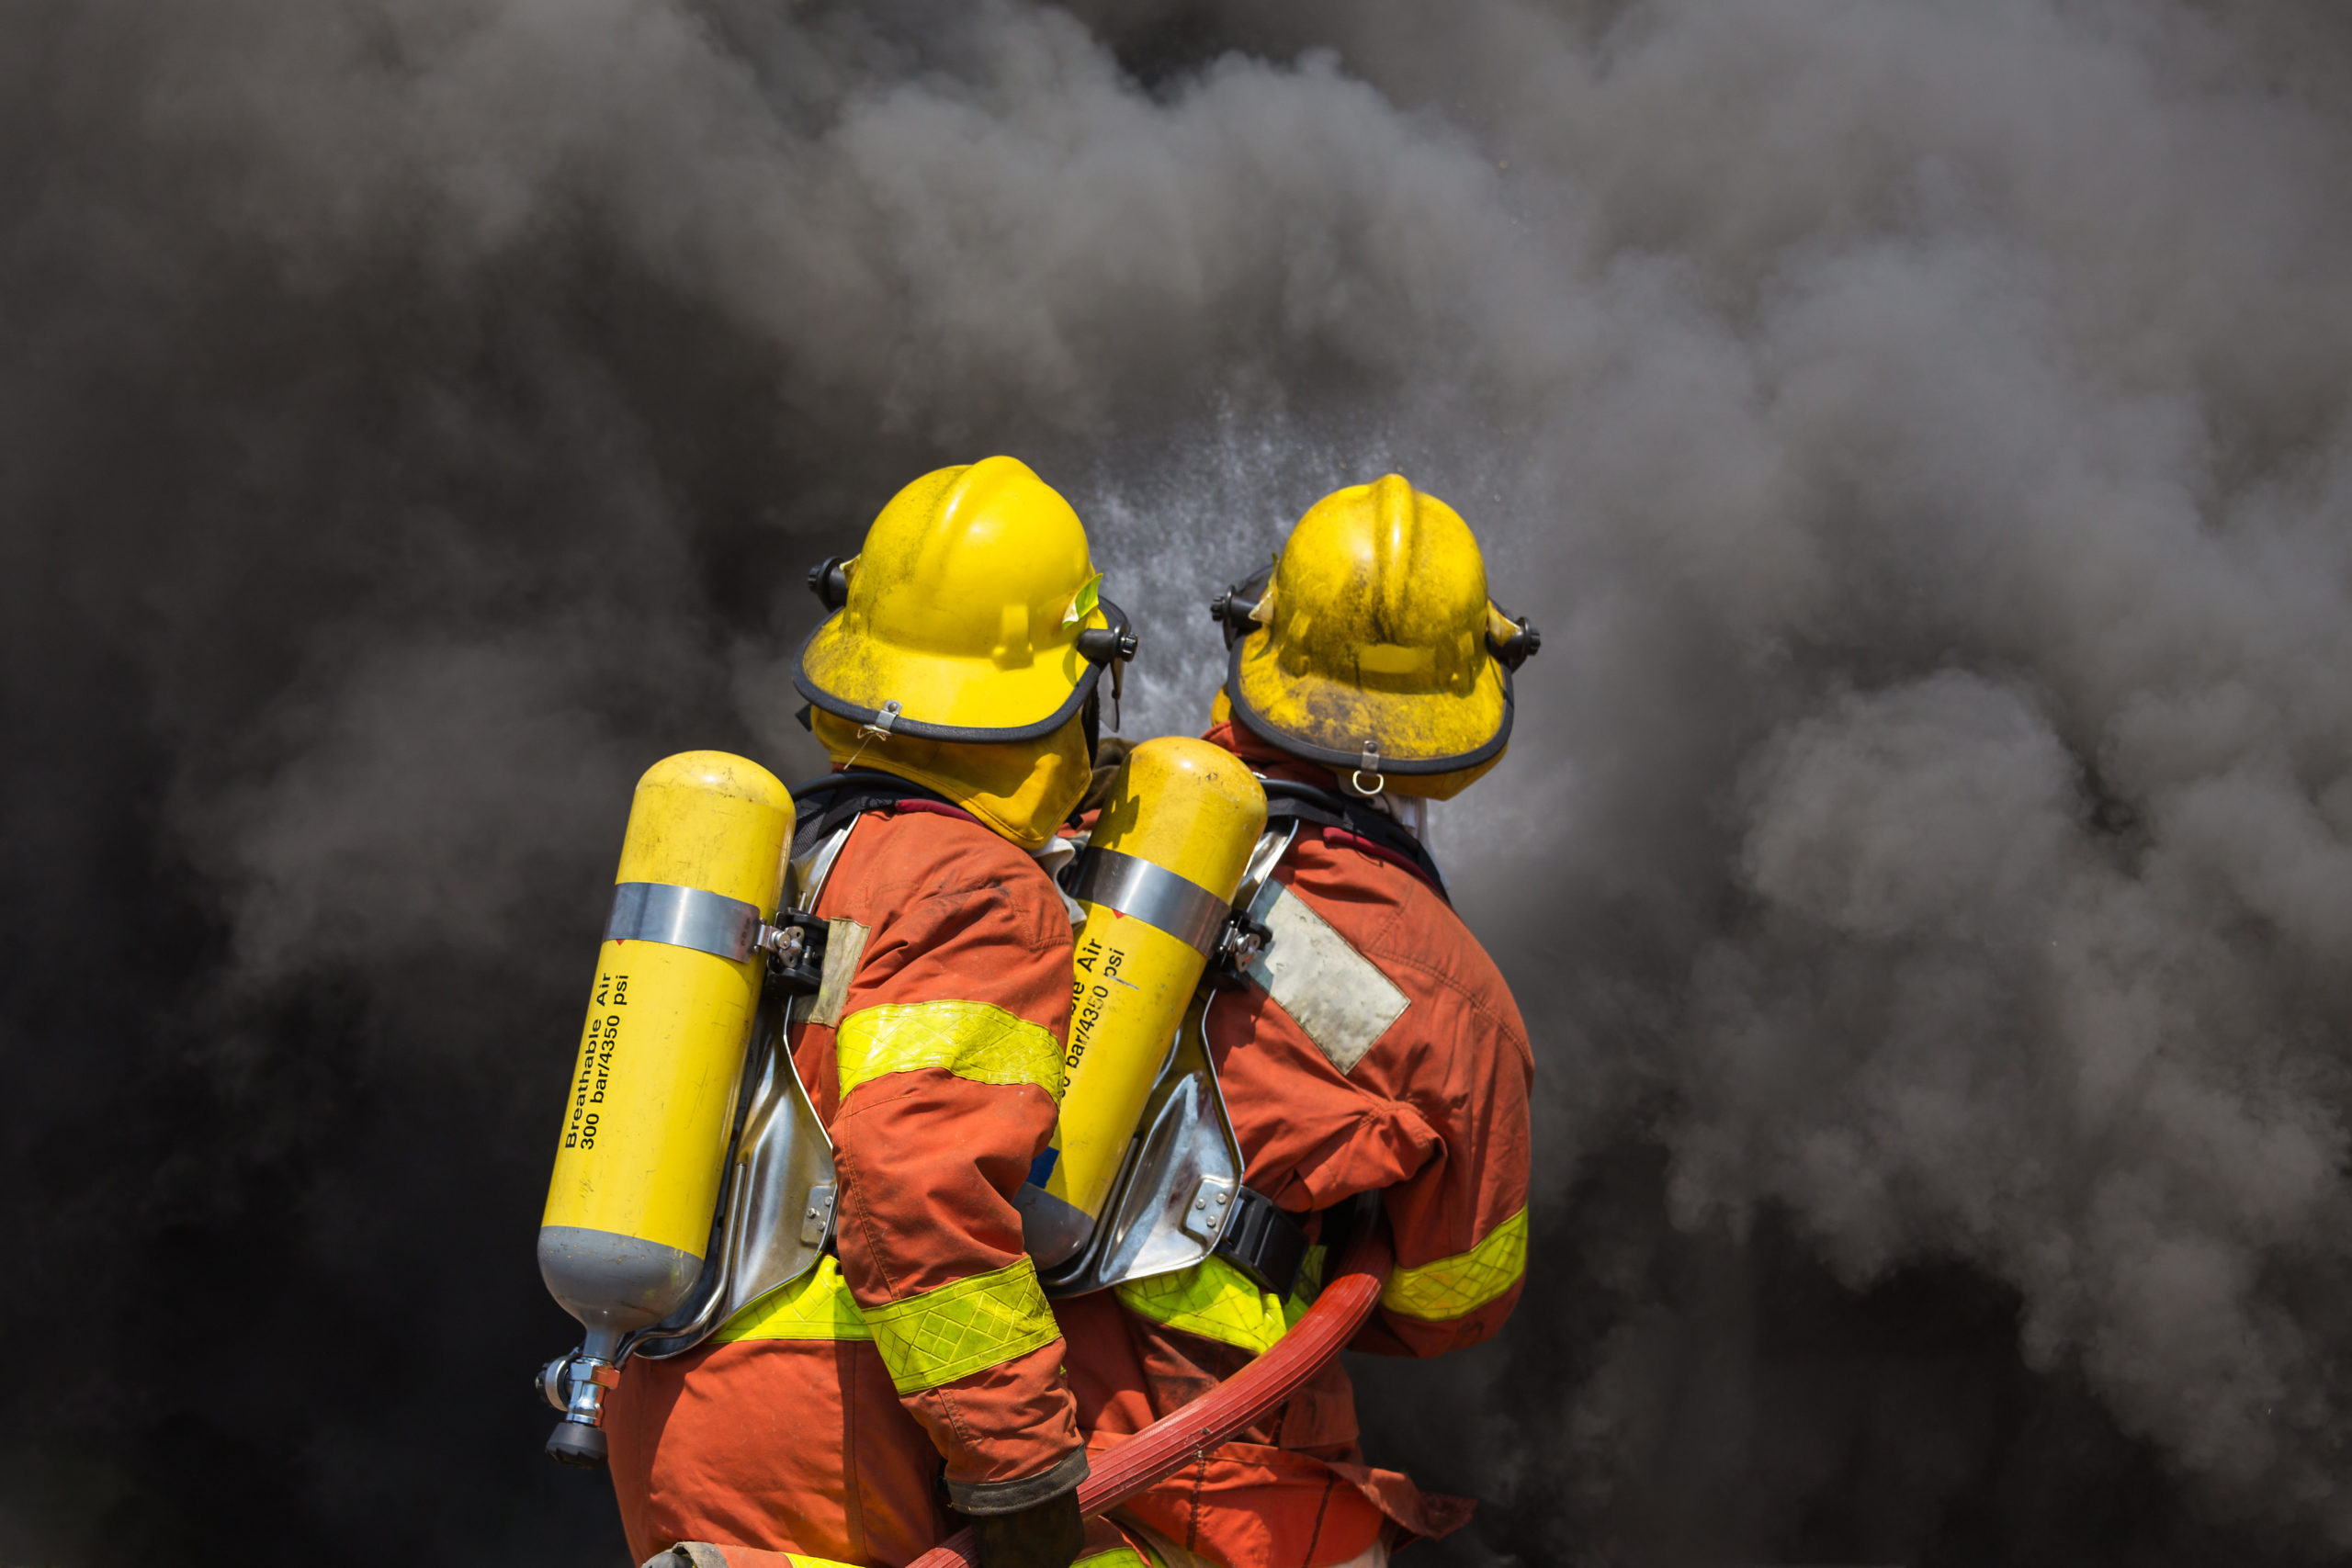 firefighters and smoke - compressed breathing air quality